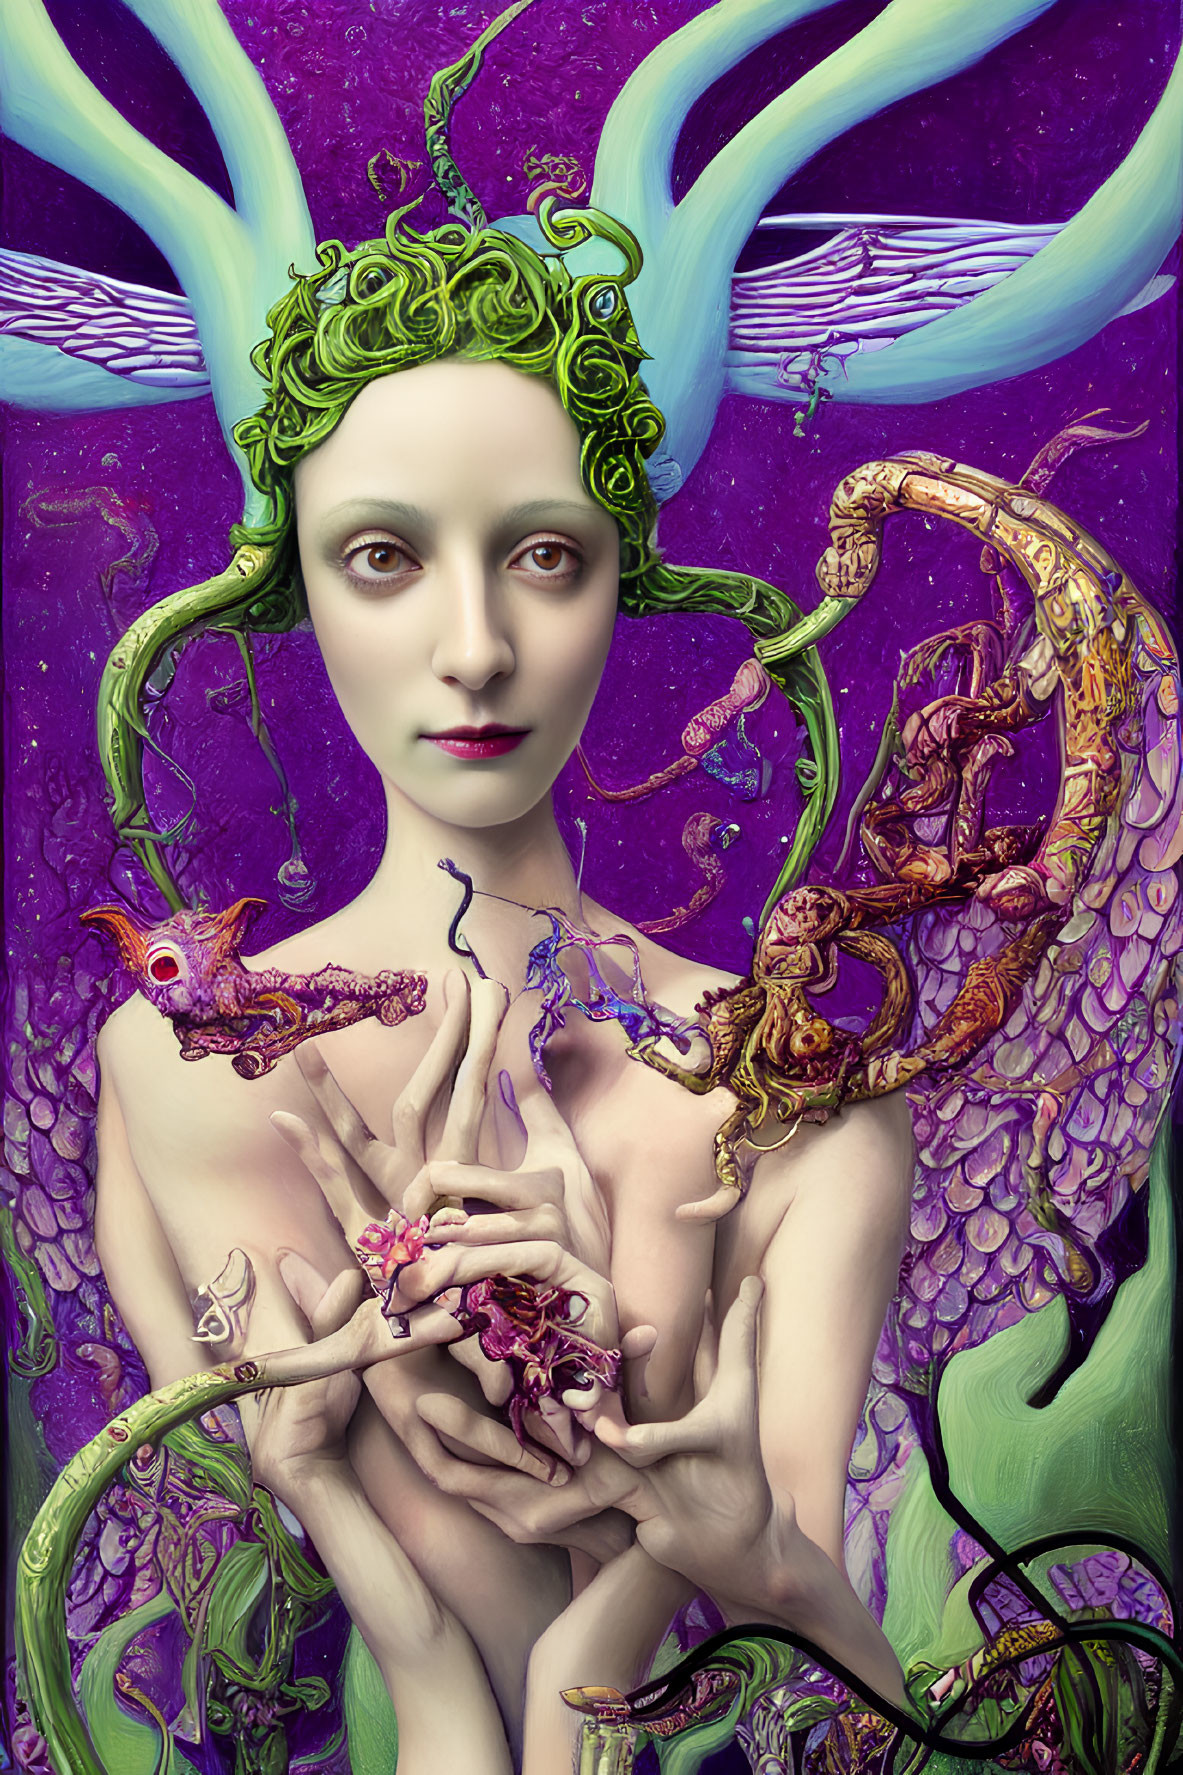 Surreal portrait of figure with green hair and antler-like horns holding a twisting creature